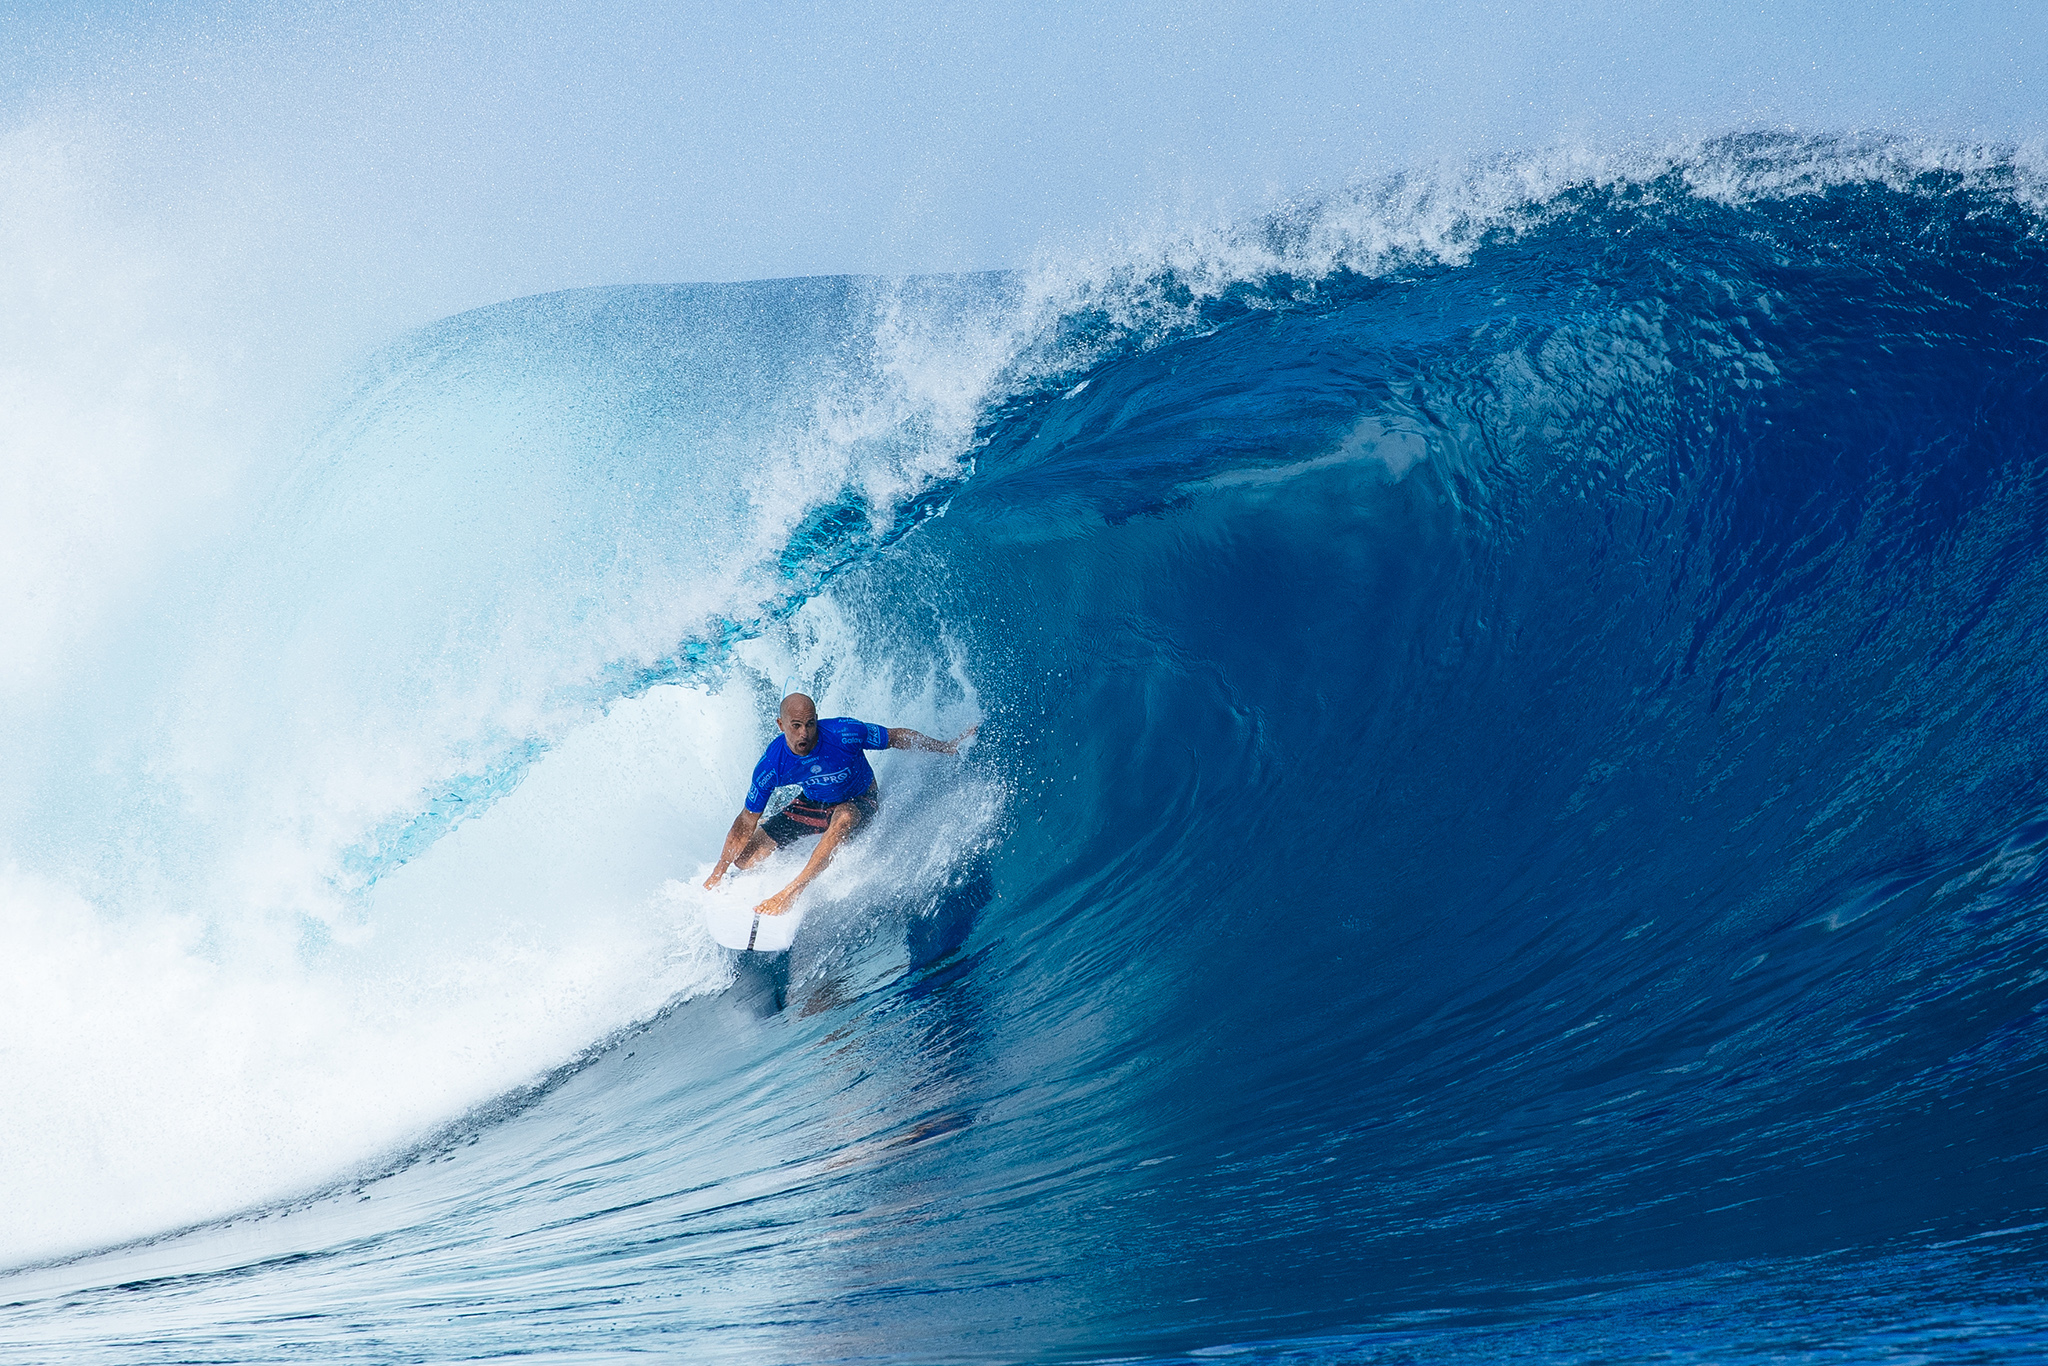 Kelly Slater of the USA (pictured) winning his in Round Three of the Fiji Pro at Cloudbreak, Tavarua on Wednesday June 15, 2016. PHOTO: © WSL/ Sloane SOCIAL: @edsloanephoto @wsl This image is the copyright of the World Surf League and is provided royalty free for editorial use only, in all media now known or hereafter created. No commercial rights granted. Sale or license of the images is prohibited. This image is a factually accurate rendering of what it depicts and has not been modified or augmented except for standard cropping and toning. ALL RIGHTS RESERVED.